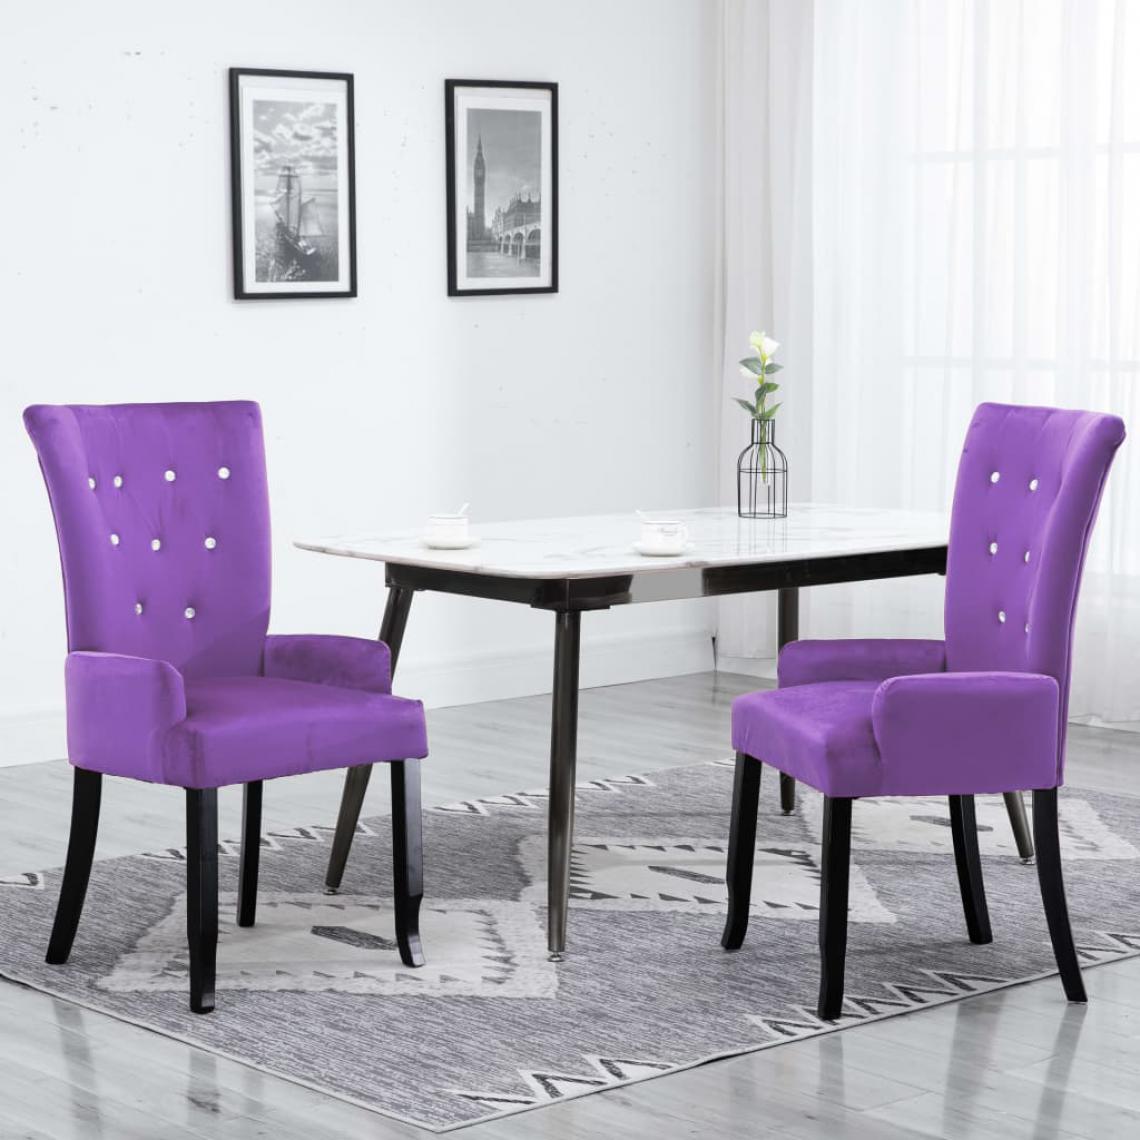 Uco - UCO Fauteuil Violet Velours - Chaises